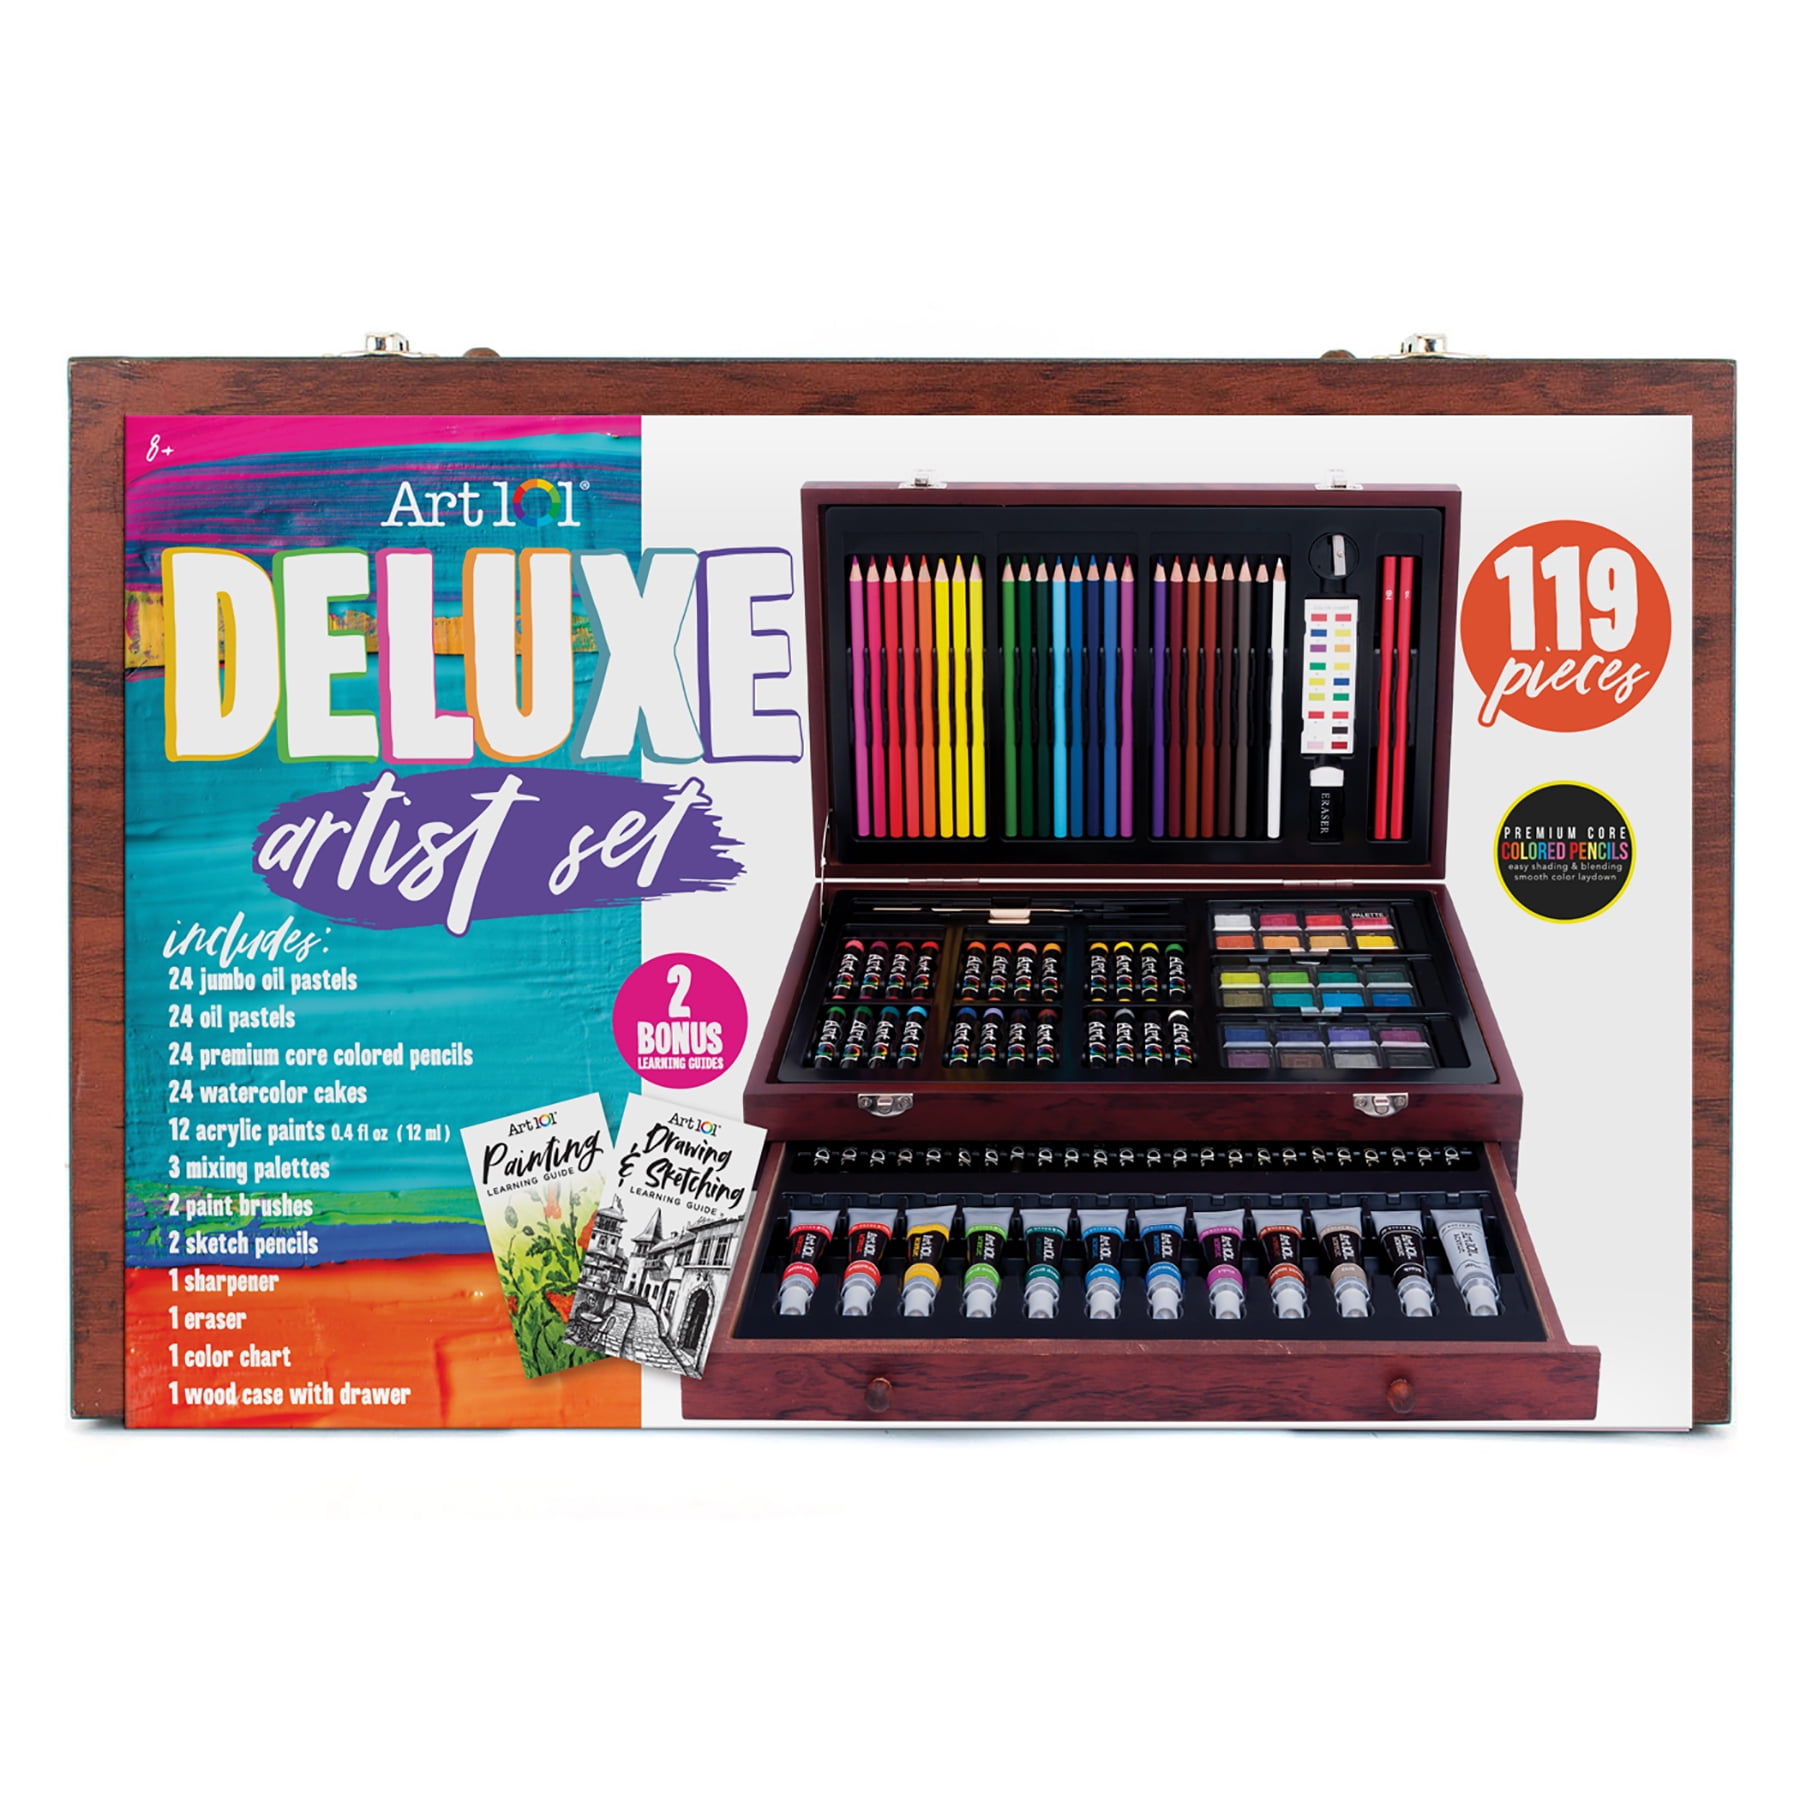  Sunnyglade 145 Piece Deluxe Art Set, Wooden Box & Drawing Kit  with Crayons, Oil Pastels, Colored Pencils, Watercolor Cakes, Sketch  Pencils, Paint Brush, Sharpener, Eraser, Color Chart (Cherry) : Arts